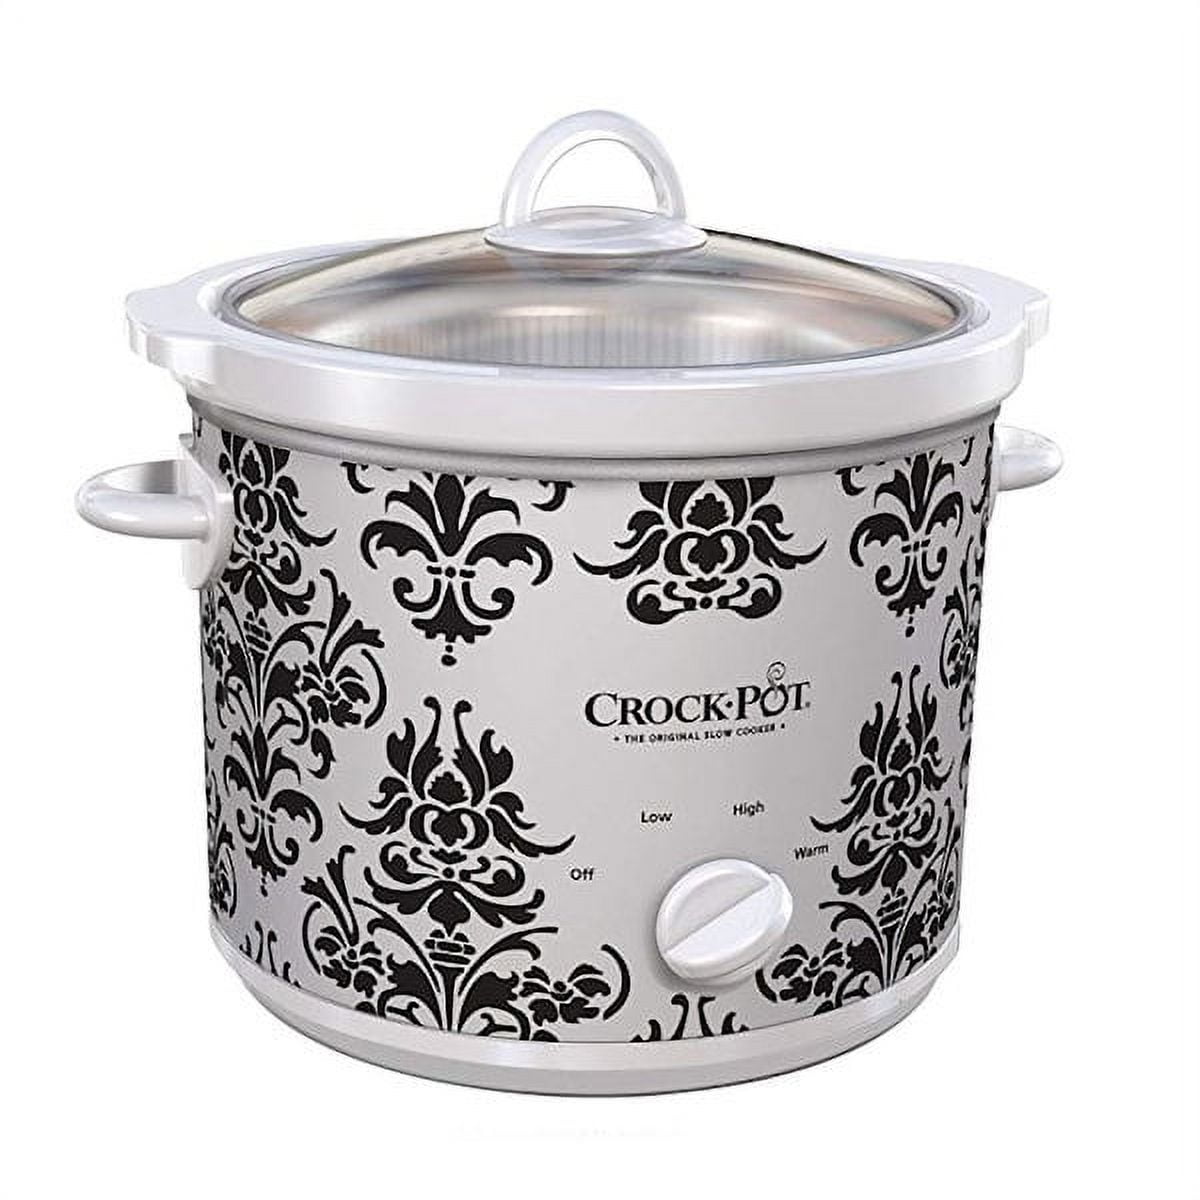 Crock-Pot manual slow cooker, 3 quart (SCR300-B) brand new - Cookers &  Steamers - Chippewa Falls, Wisconsin, Facebook Marketplace